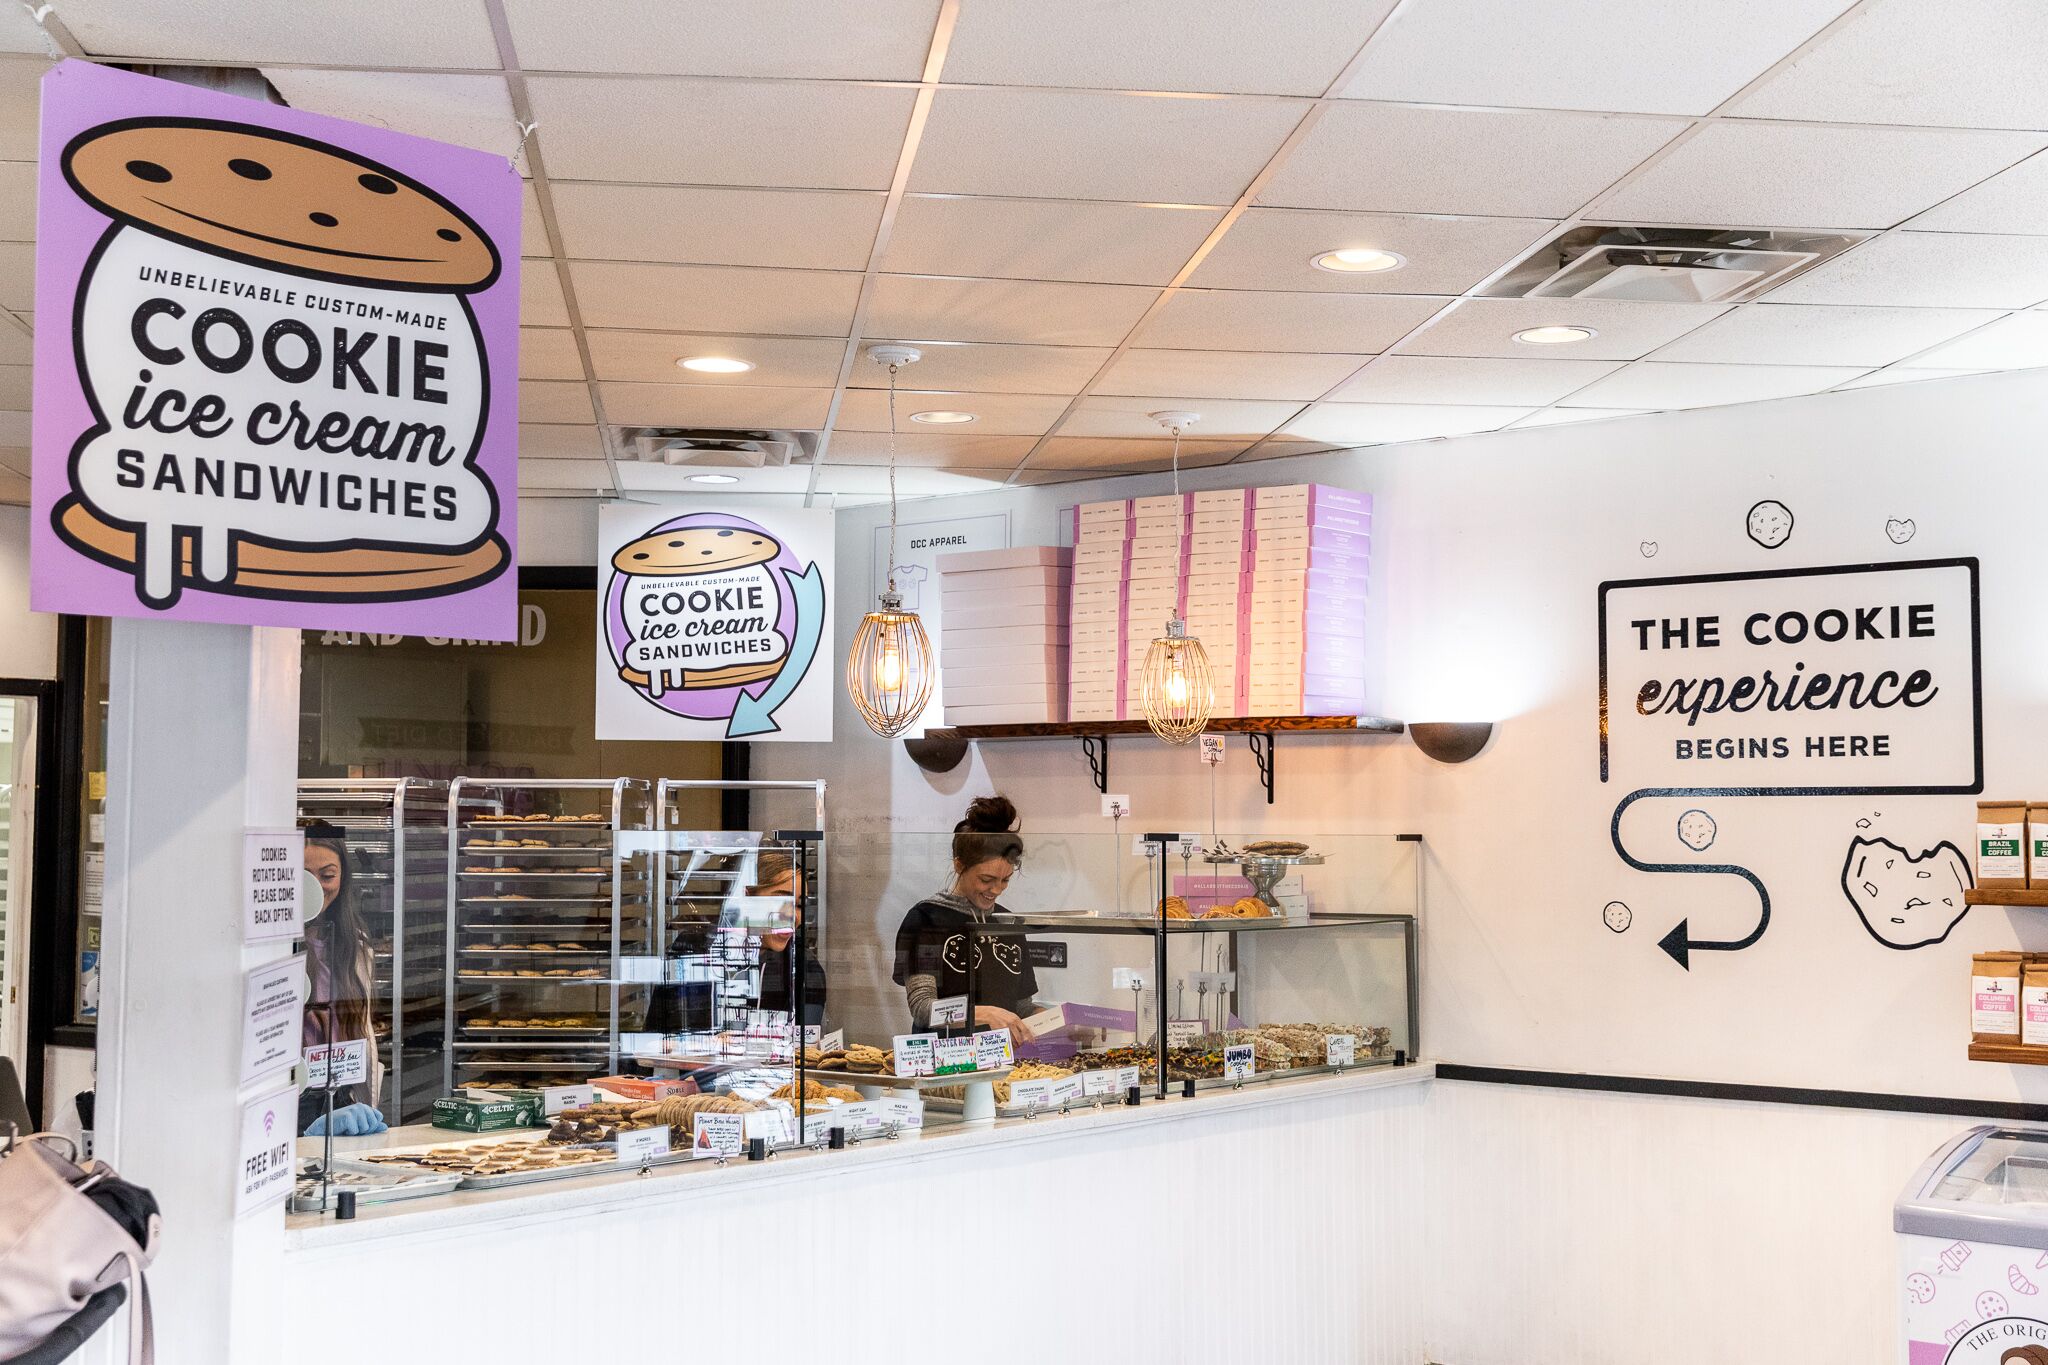 The inside of the Detroit Cookie Co. cafe features white walls and a counter with cookies on trays. Pink signs surround the counter advertising items such as “Unbelievable custom-made ice cream sandwiches.”